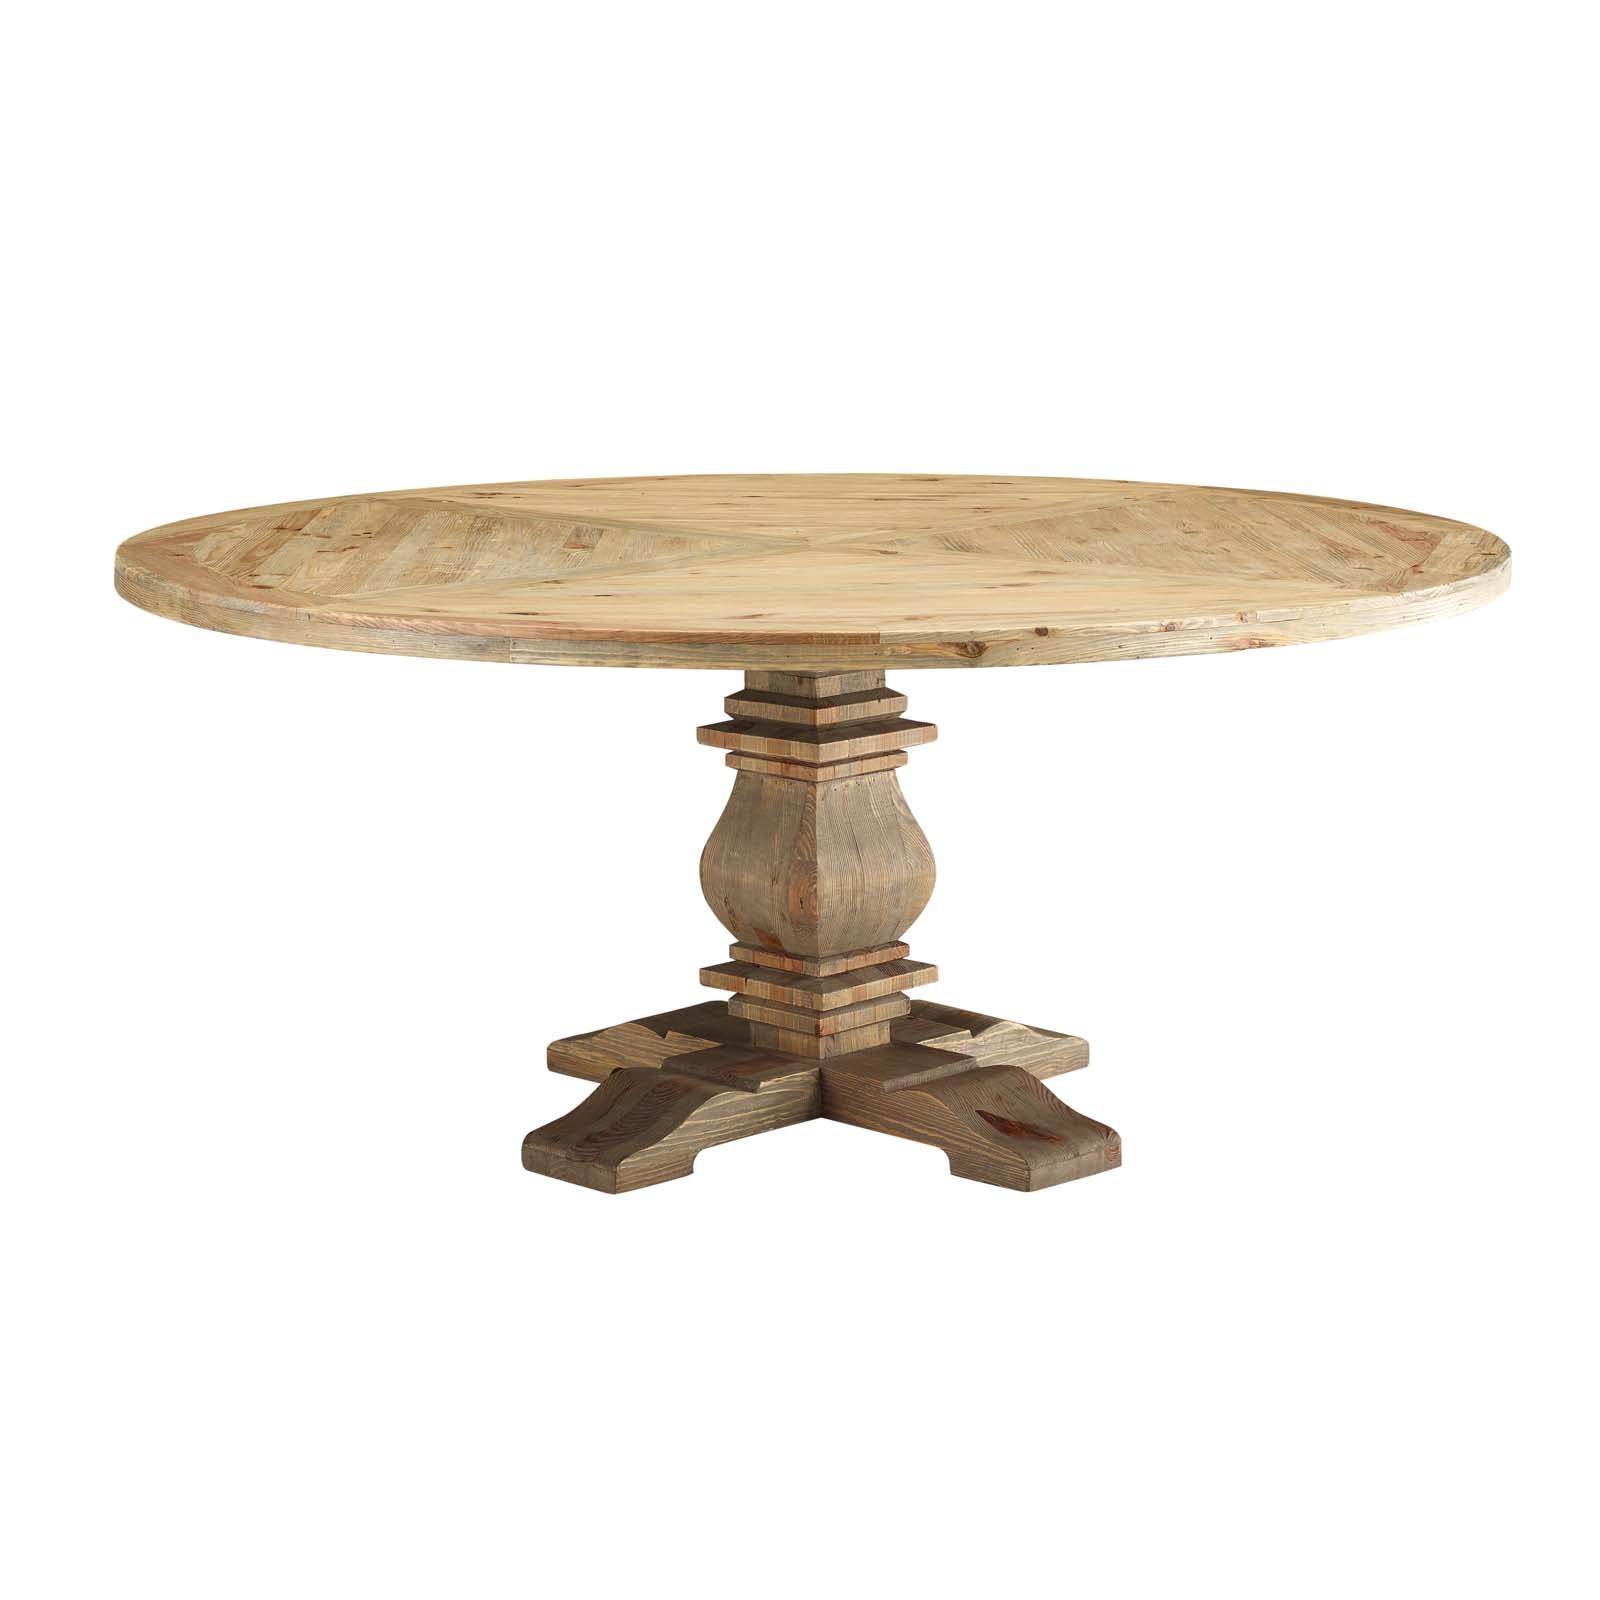 Column 71" Round Pine Wood Dining Table - East Shore Modern Home Furnishings